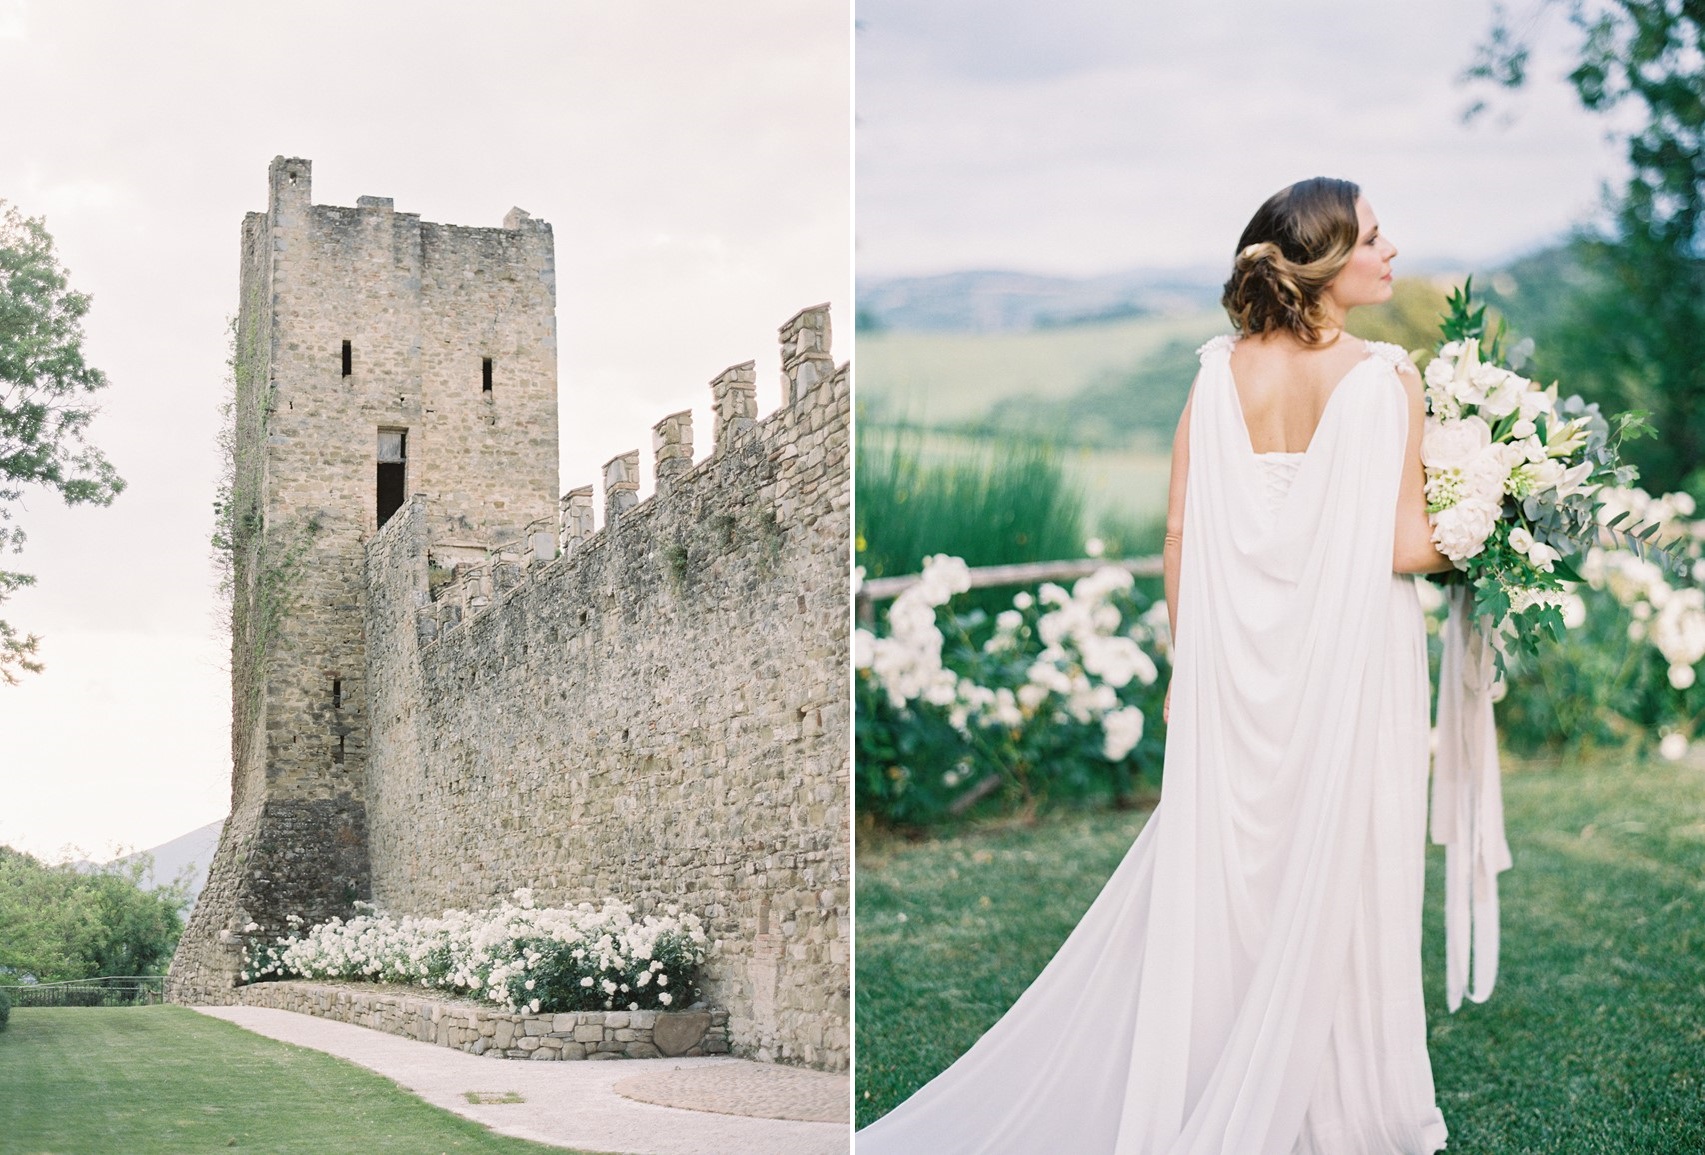 Timelessly Romantic Wedding Inspiration at an Italian Castle